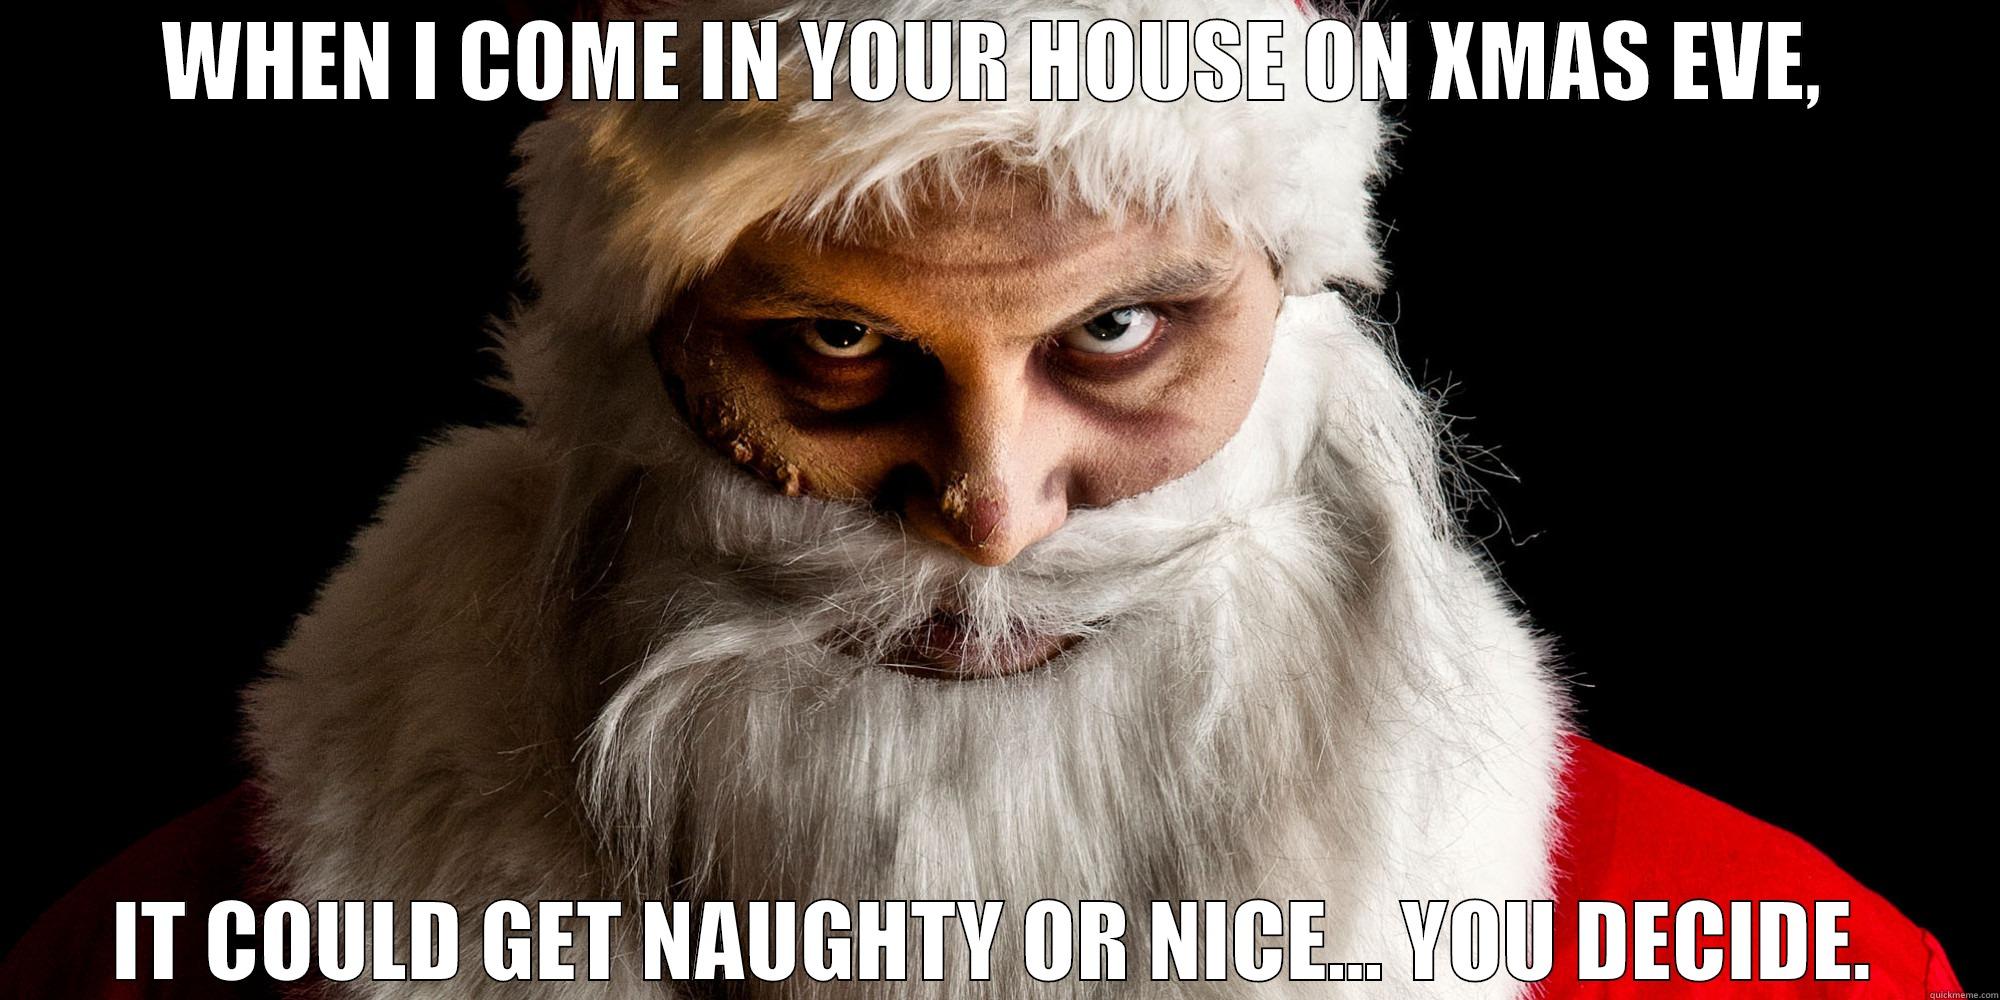 bad santa - WHEN I COME IN YOUR HOUSE ON XMAS EVE, IT COULD GET NAUGHTY OR NICE... YOU DECIDE. Misc